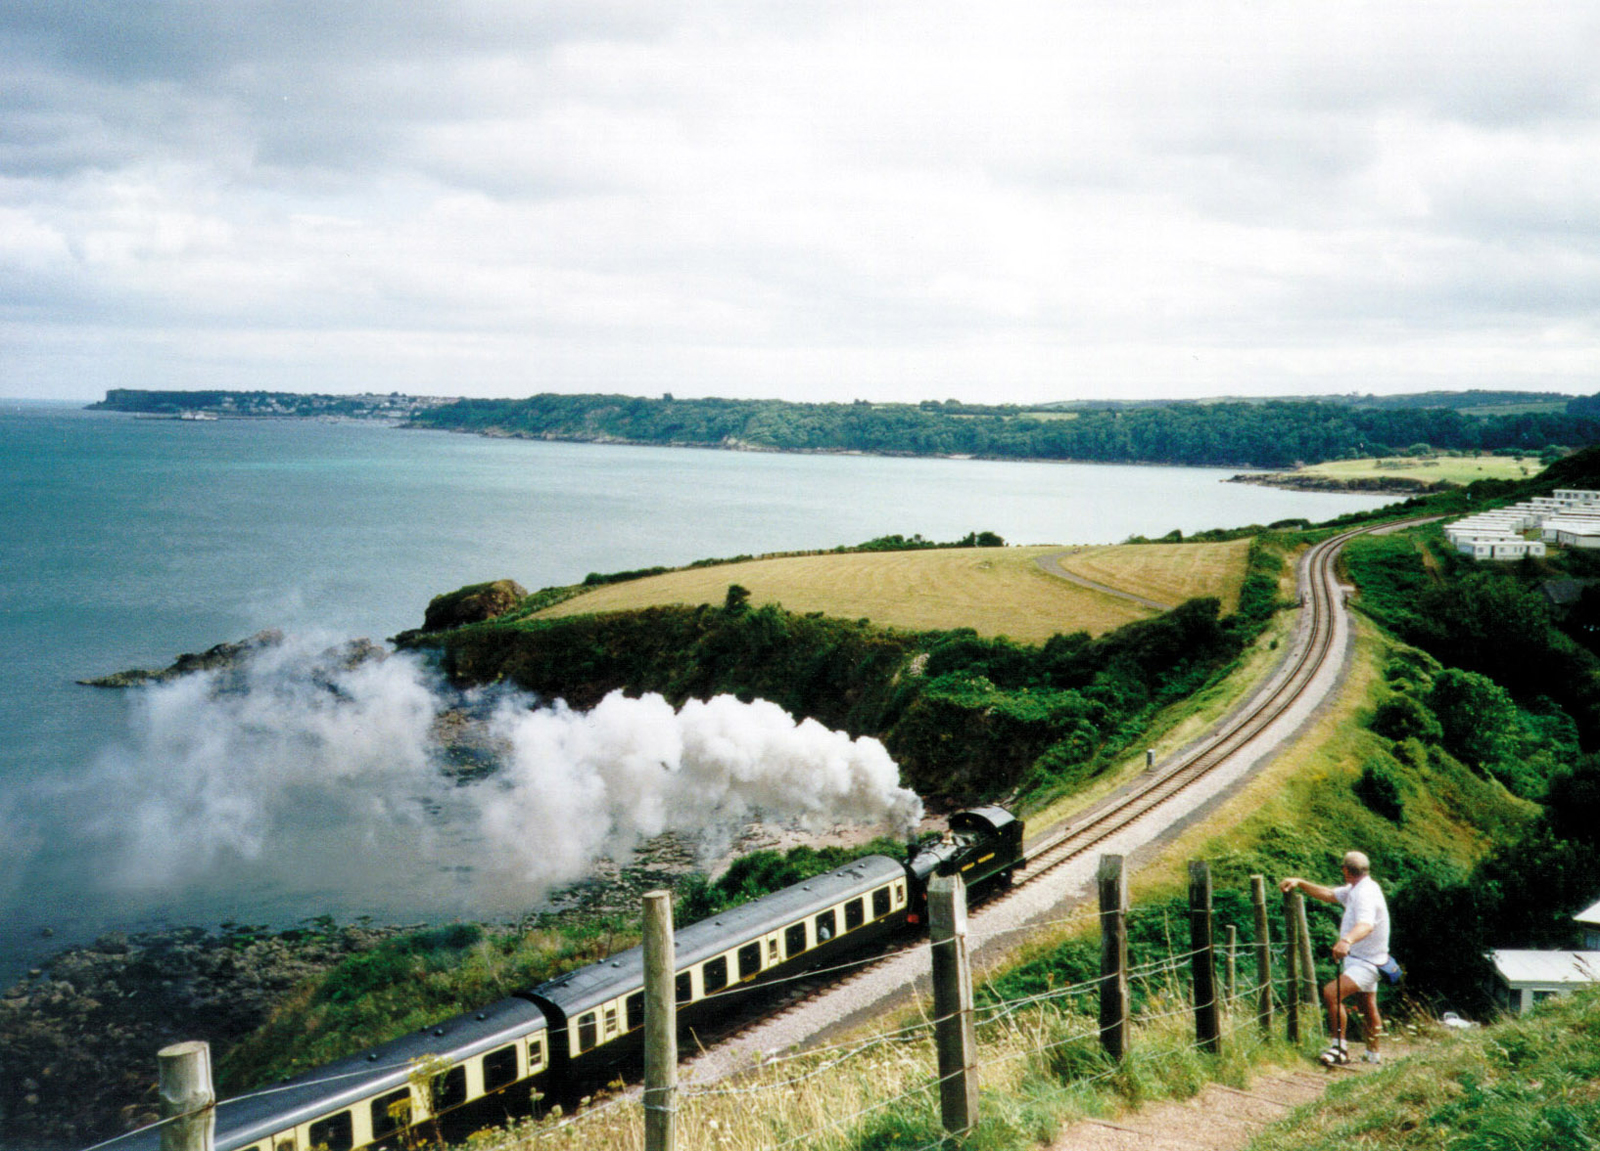 A romantic view of a steam train passing along the coast between Paignton and Dartmouth